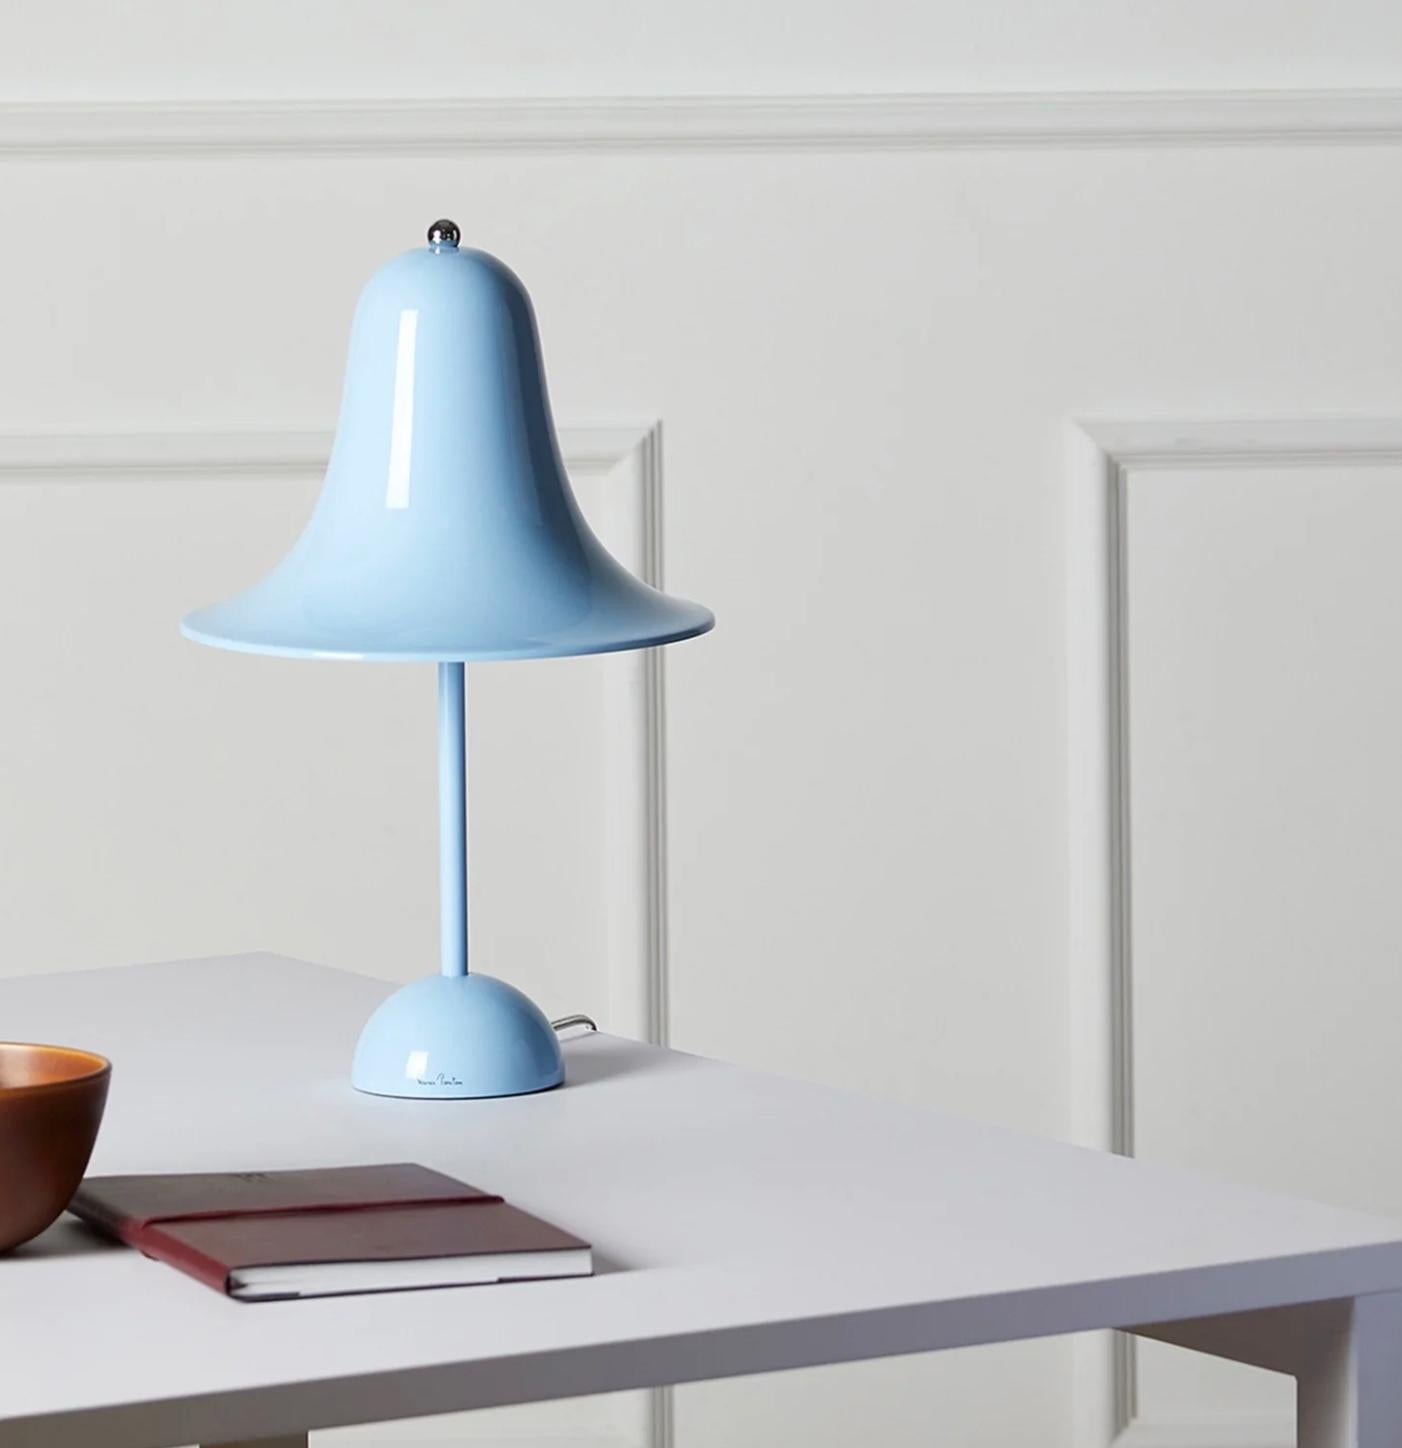 Verner Panton 'Pantop' table lamp in 'Light Blue' for Verpan. Designed in 1980. New, current production.

The elegant Pantop line was designed by Verner Panton in 1980, and has for a long time been a staple of the Verpan collection. Pantop is